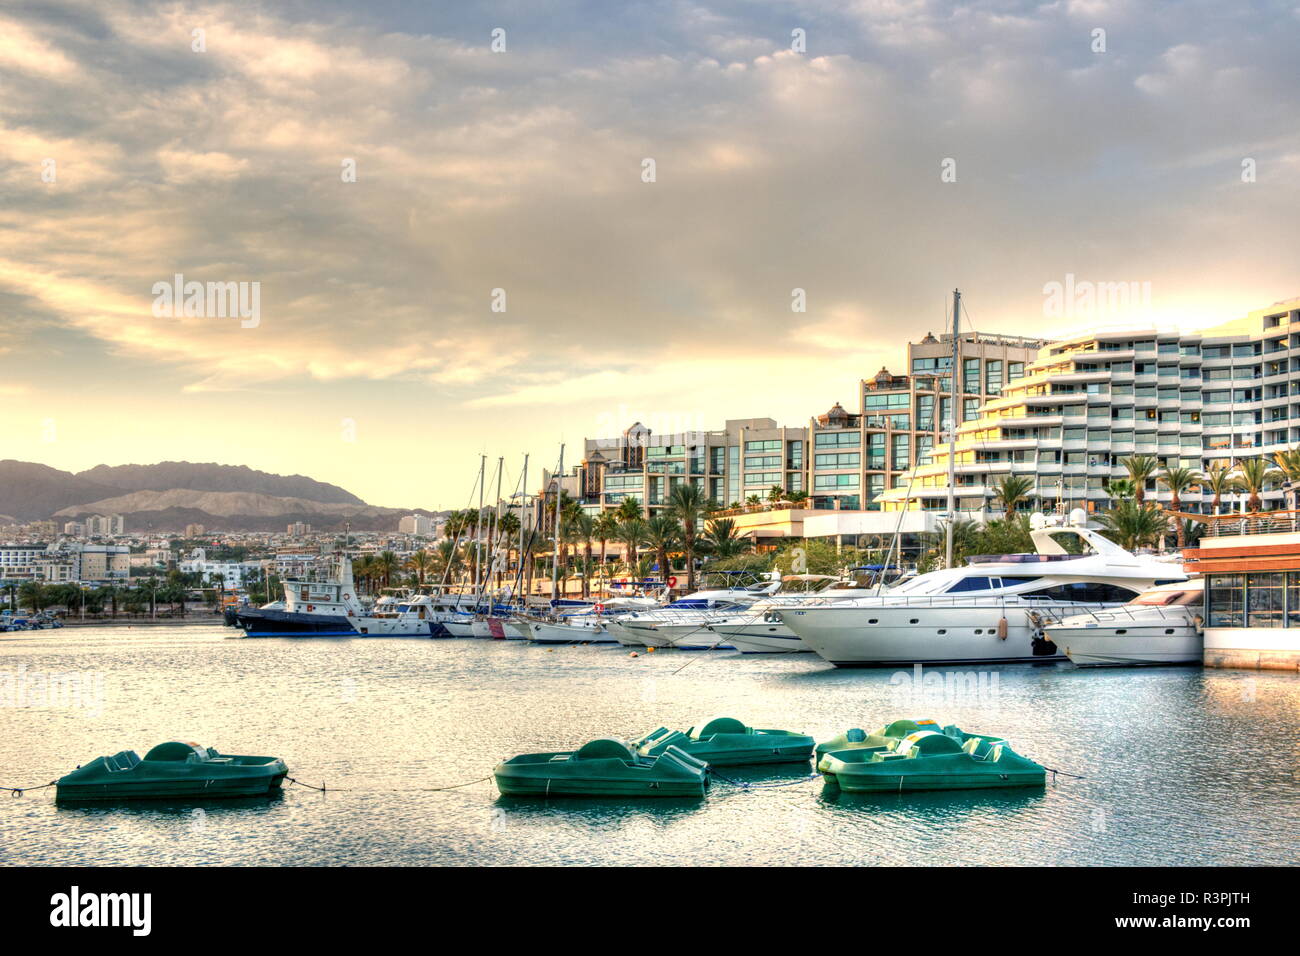 small turquoise pedalos in contrast to large yachts in the marina of Eilat Stock Photo